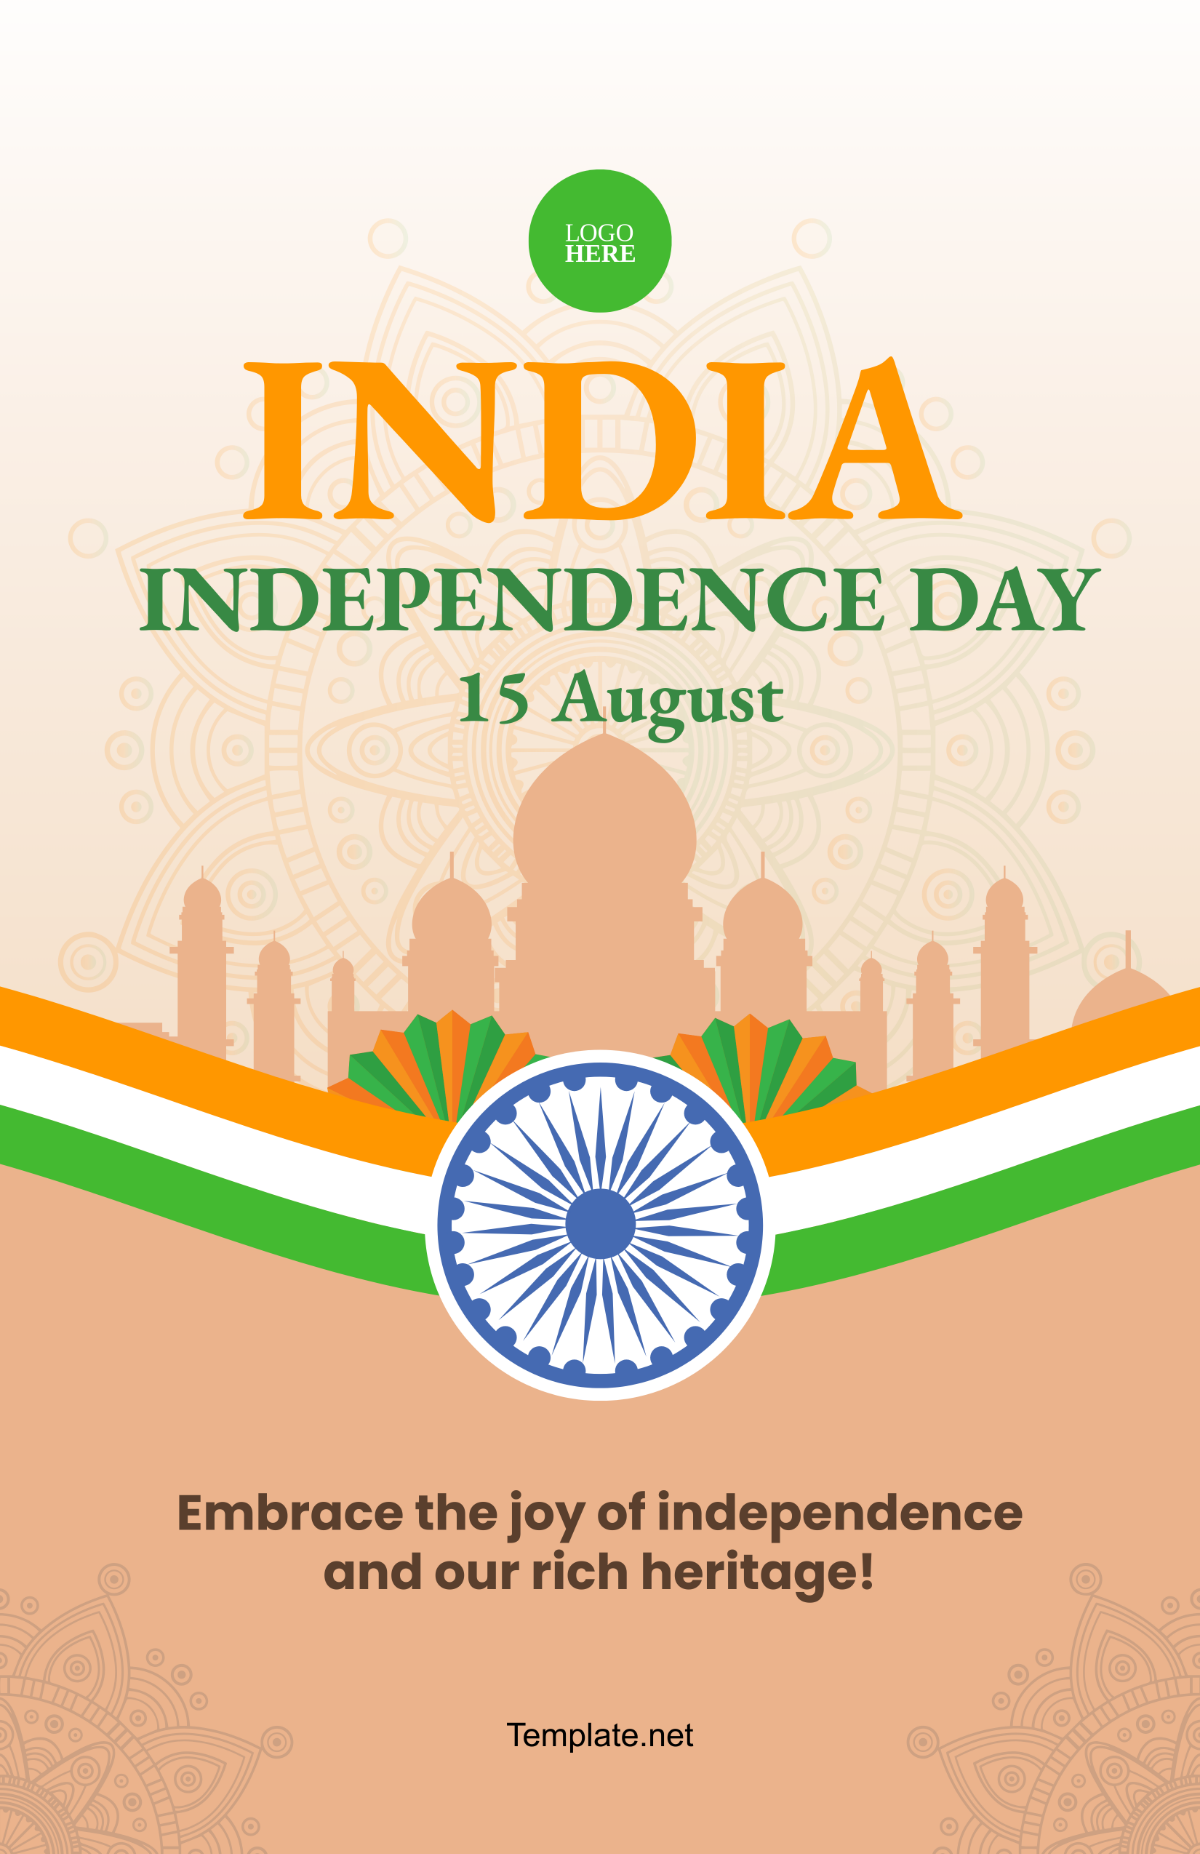 India Independence Day Social Media Poster